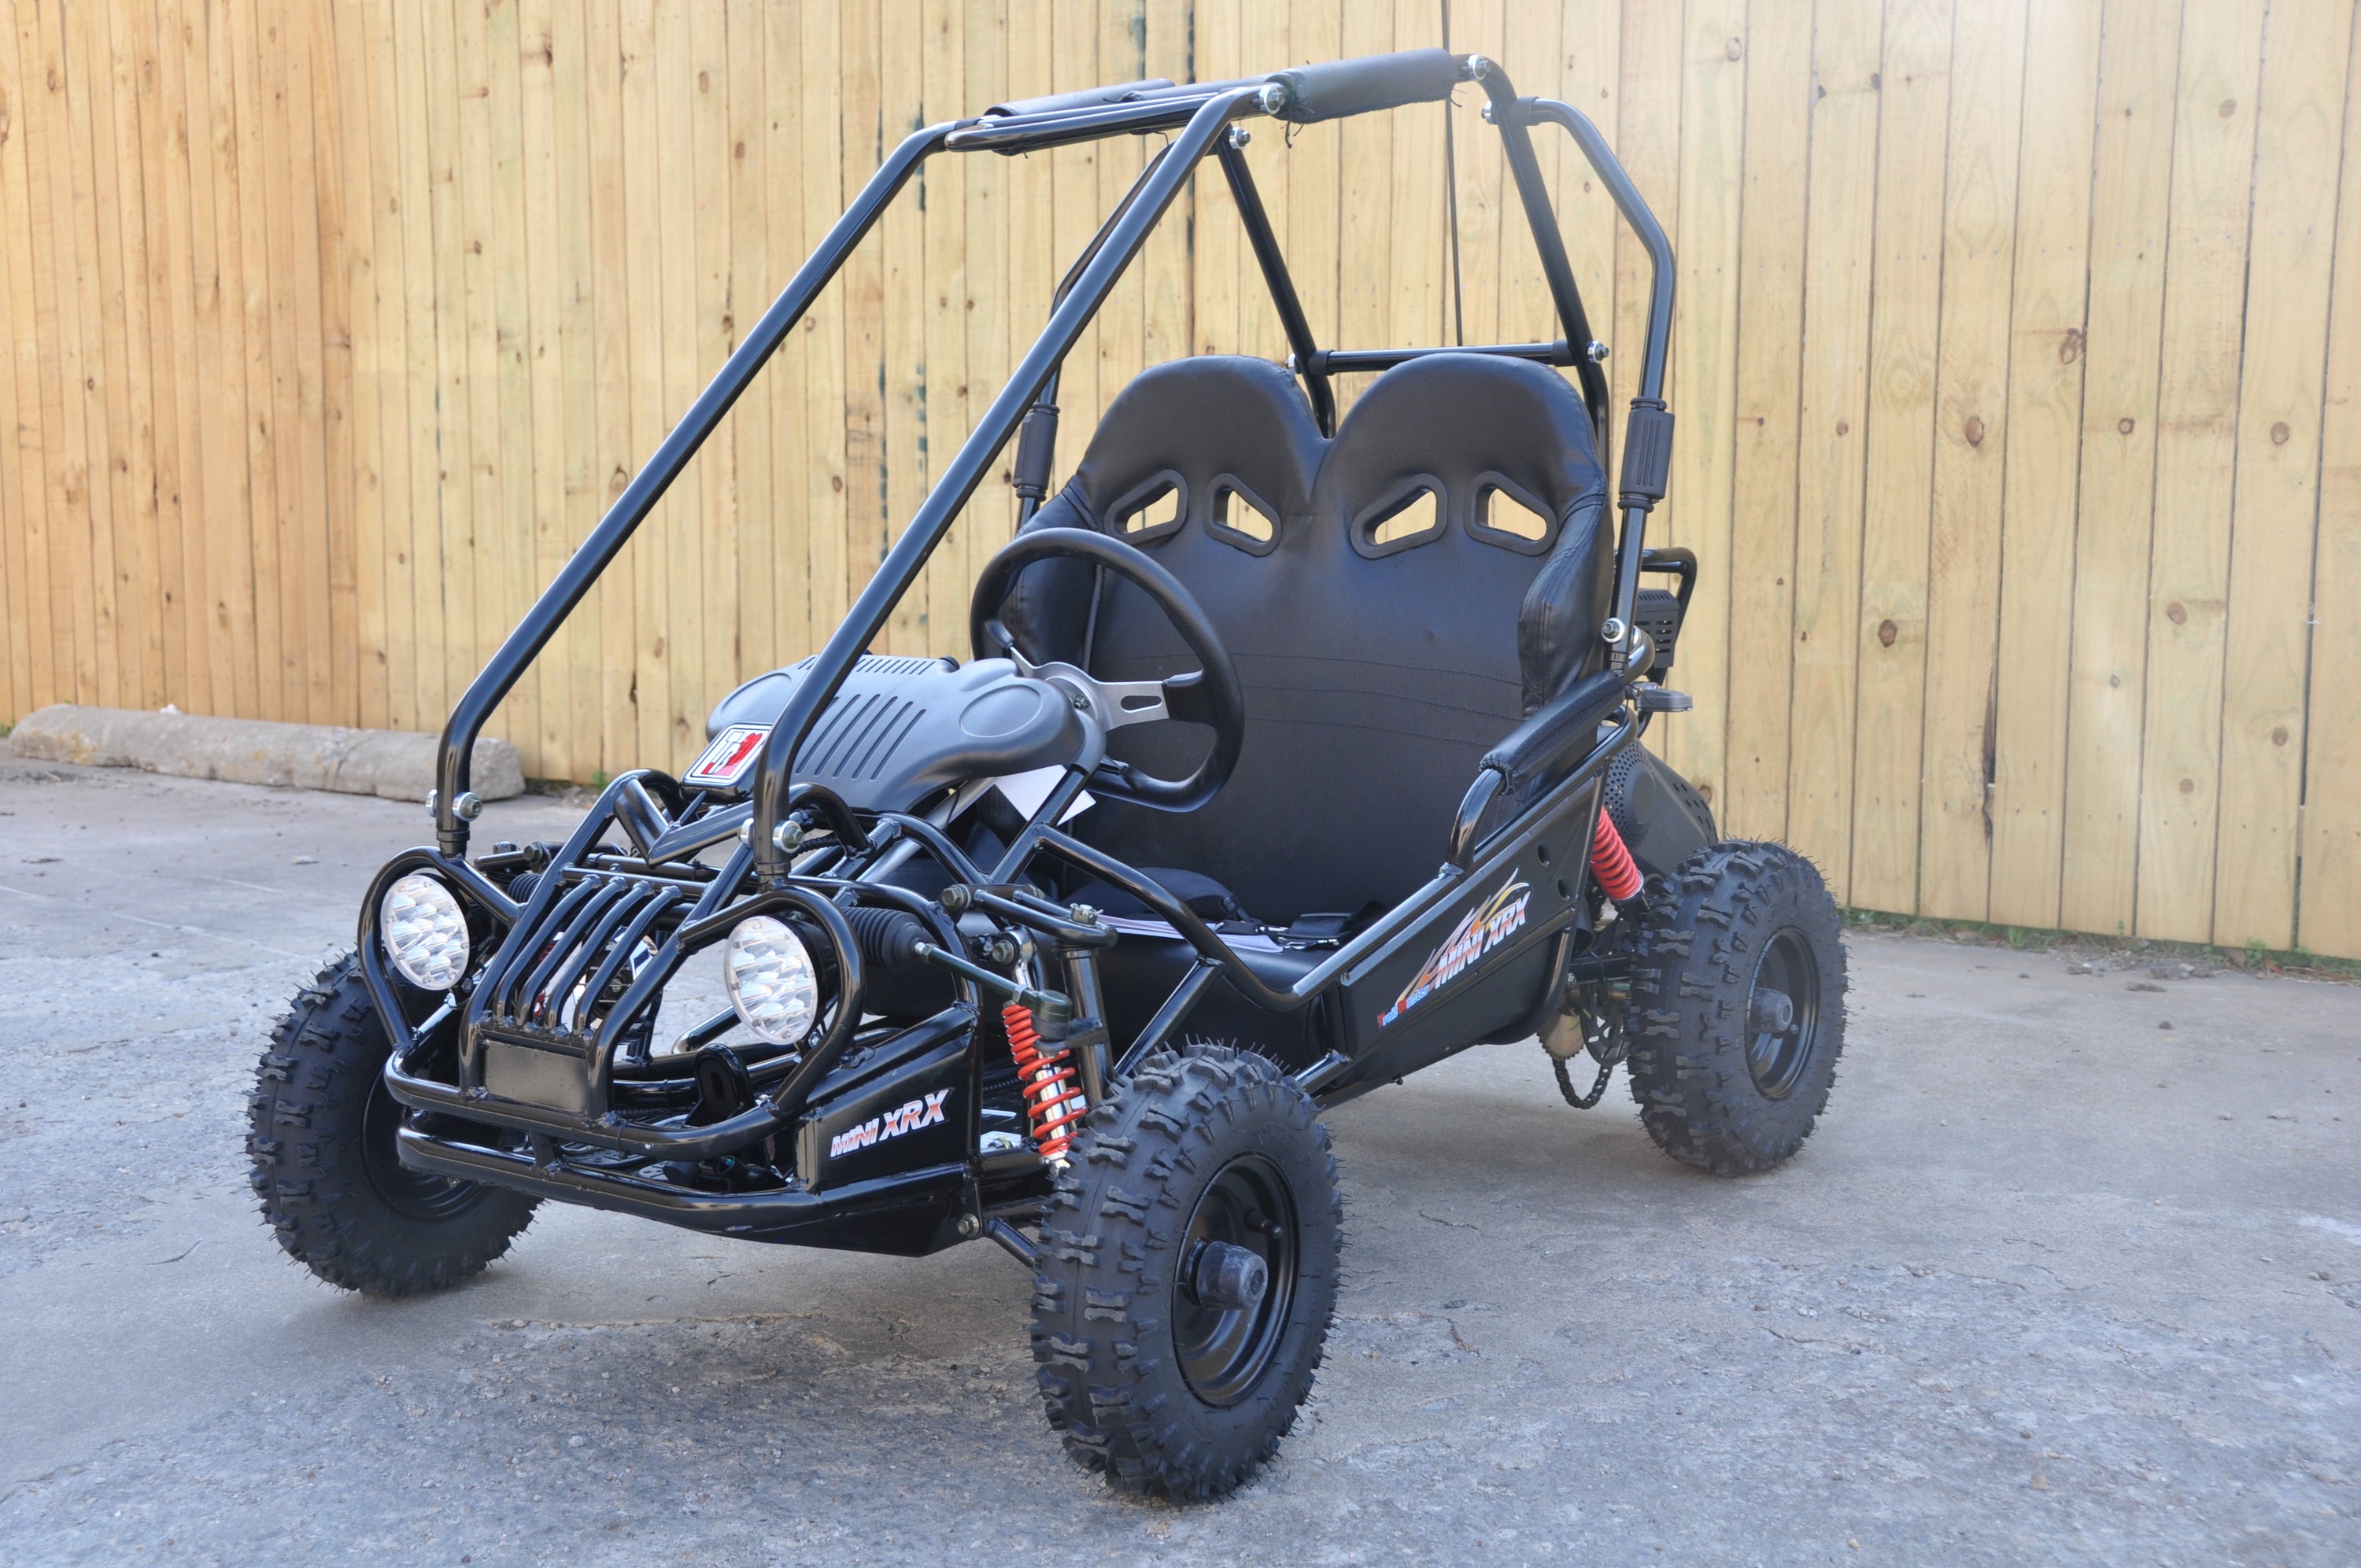 OVERSTOCK Inventory Clearance Sale! TrailMaster Mini XRX KIDS Go Kart  w/REVERSE-ages 4-9 Fully Assembled-Black, Dave Kingston's Karts